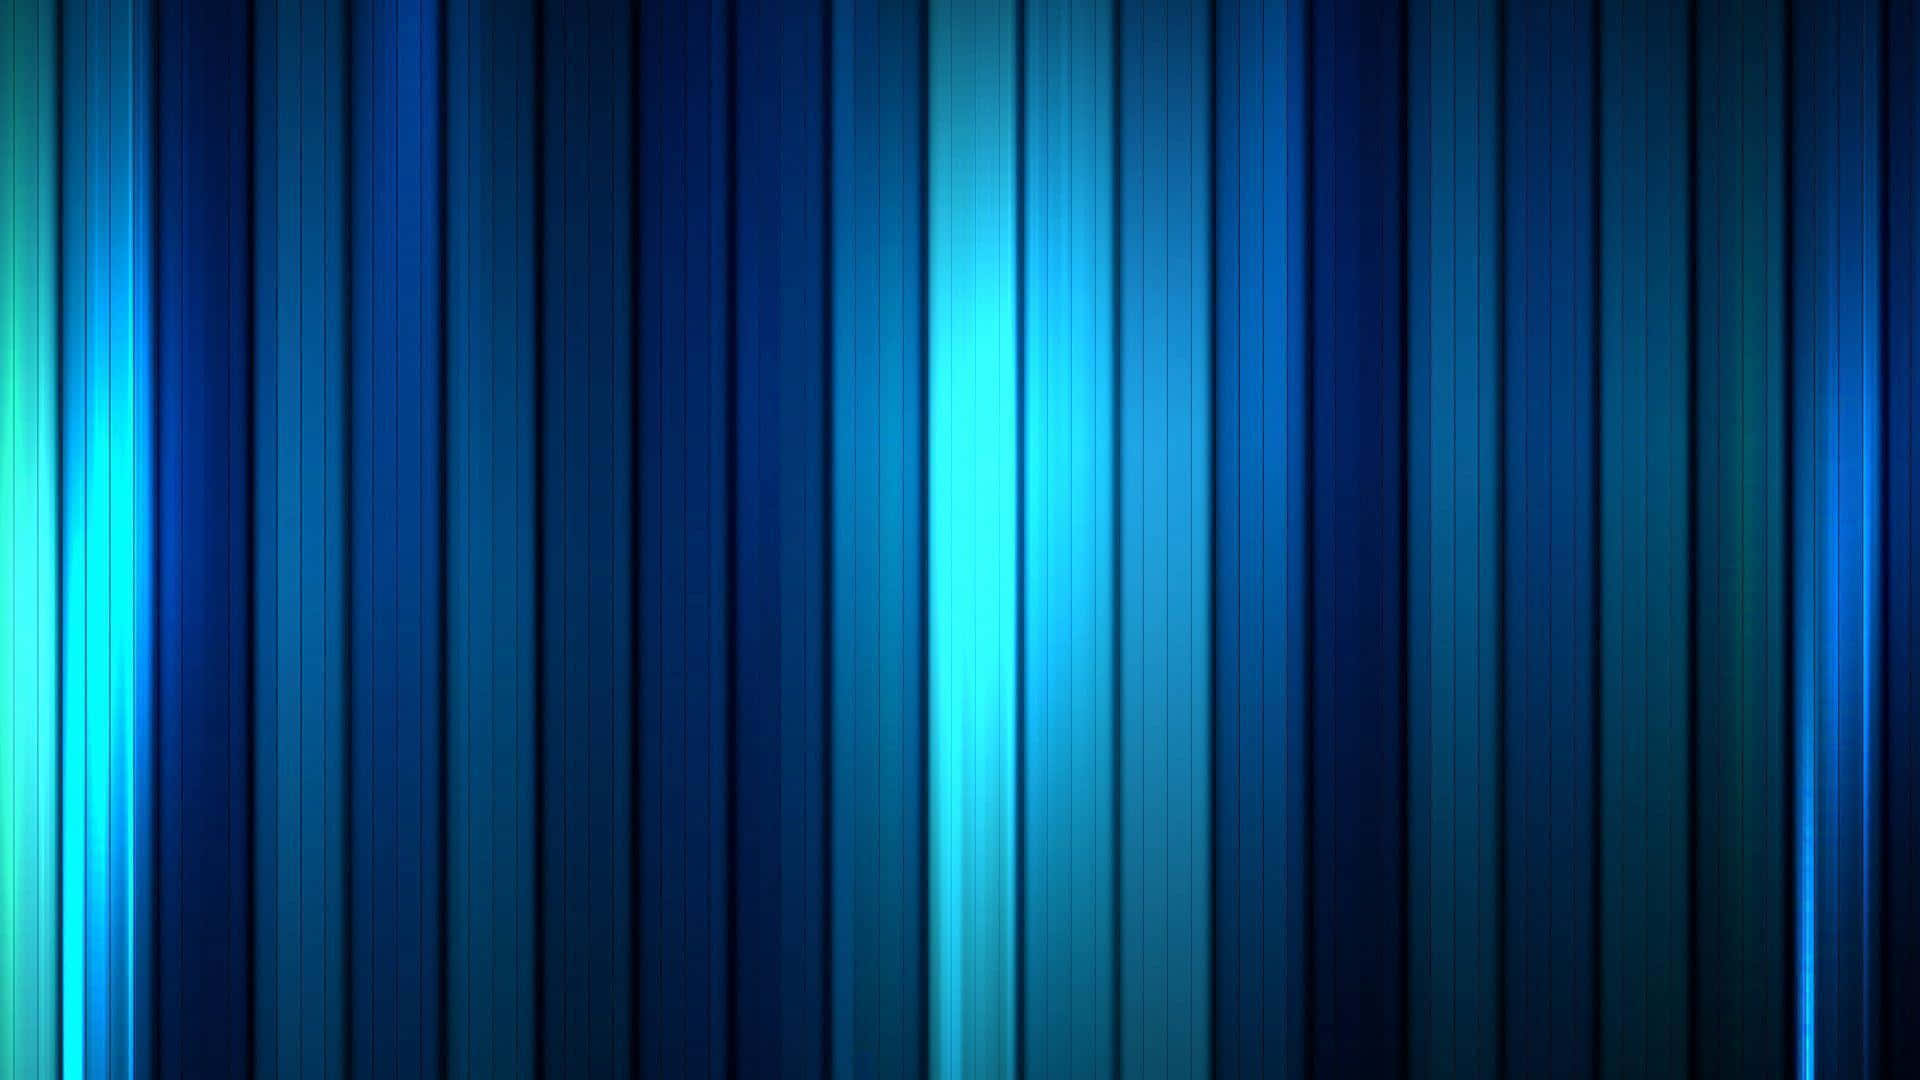 Blue And White Striped Wallpaper